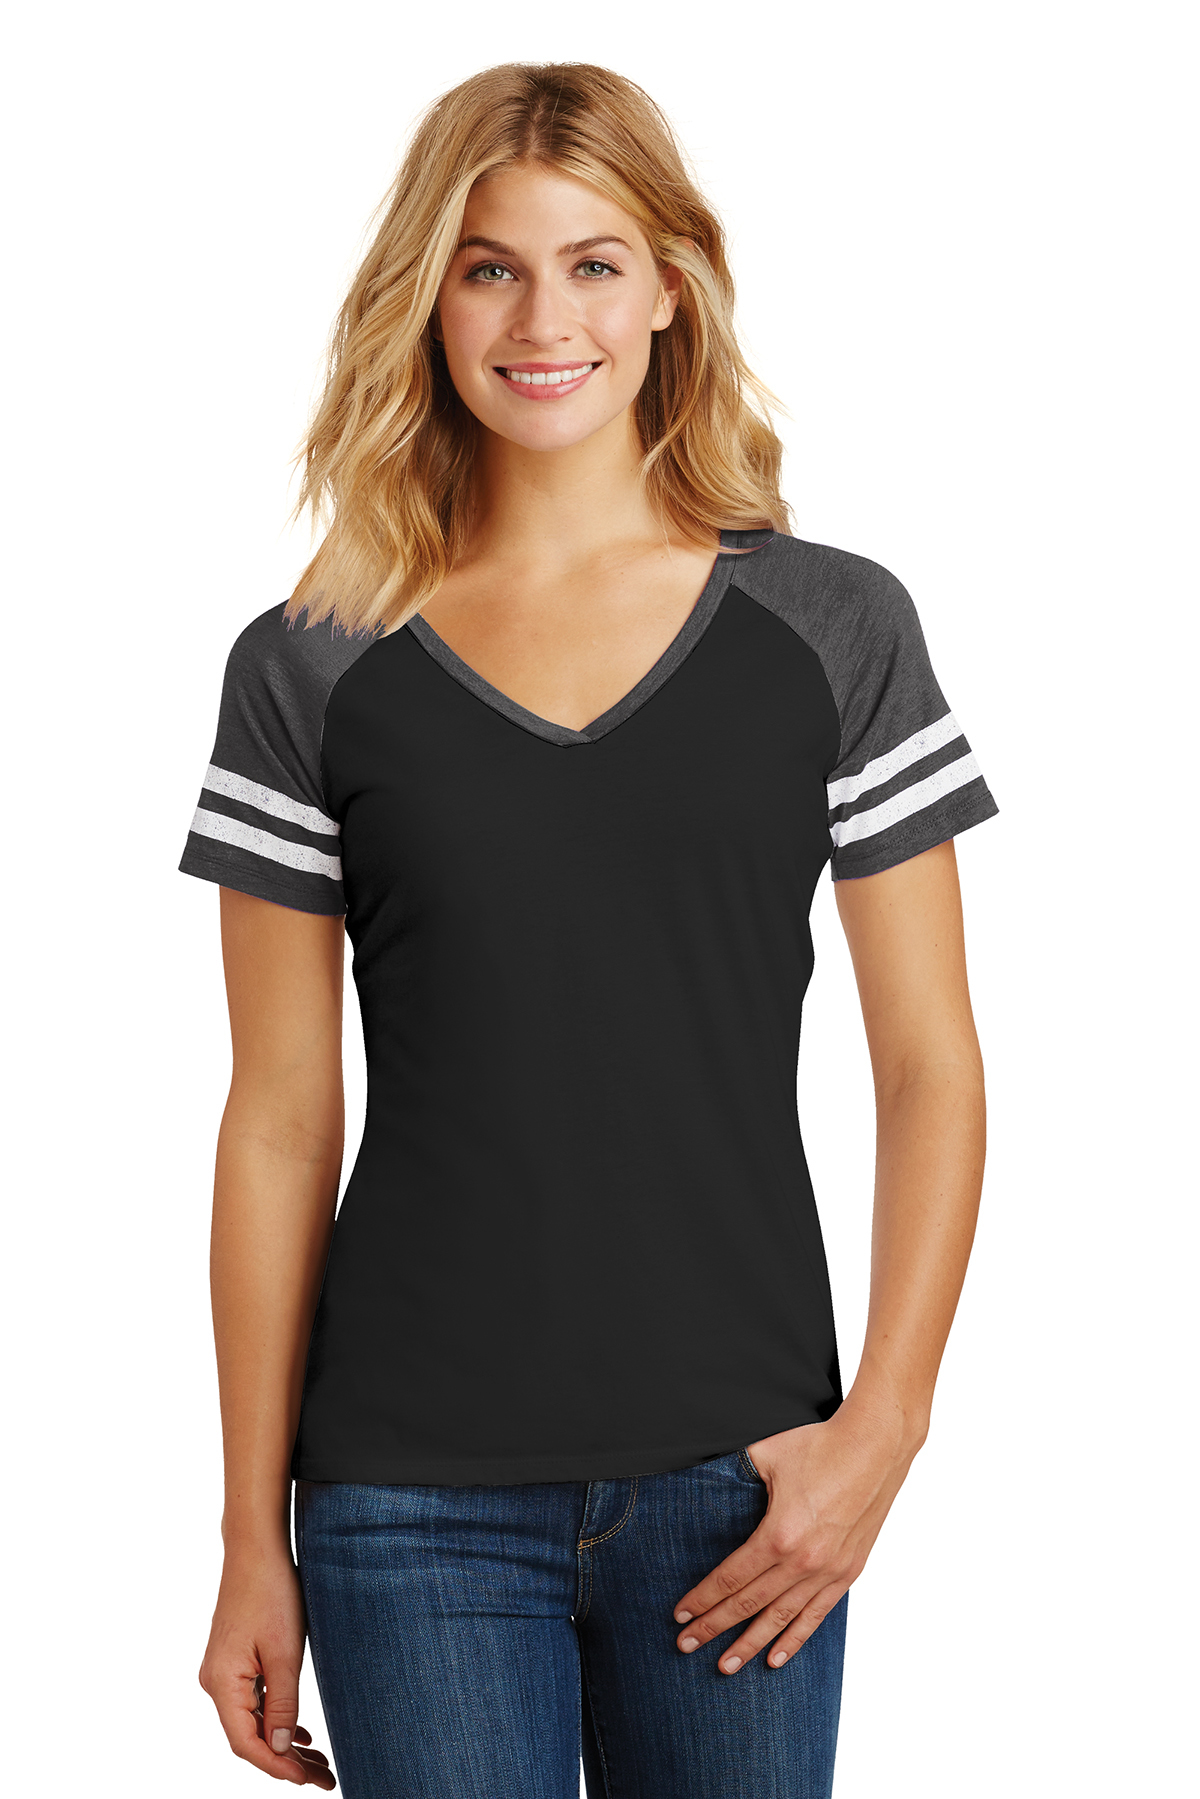 District ® Women’s Game V-Neck Tee